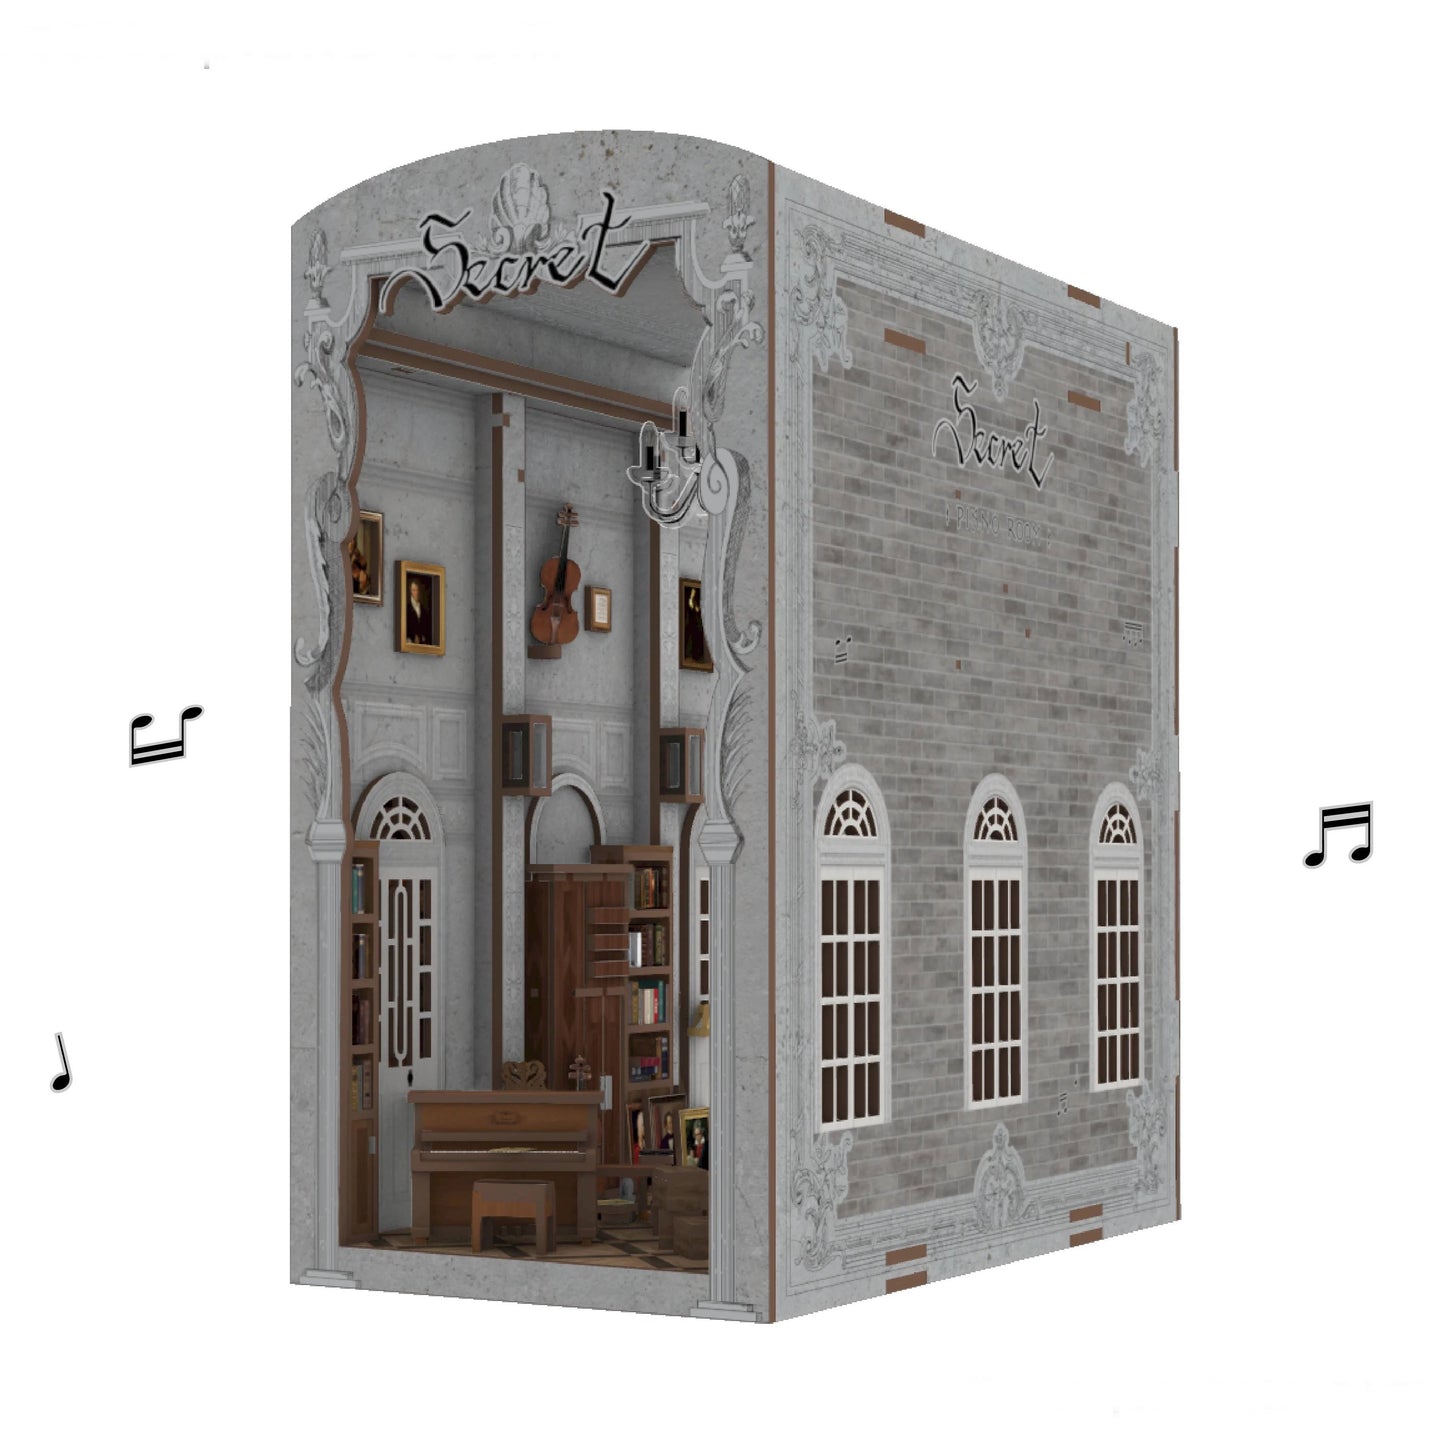 Piano Room DIY Book Nook Kit, Music themed bookshelf insert decor diorama, 3d wooden puzzles bookend, miniature house crafts - 45 angle view